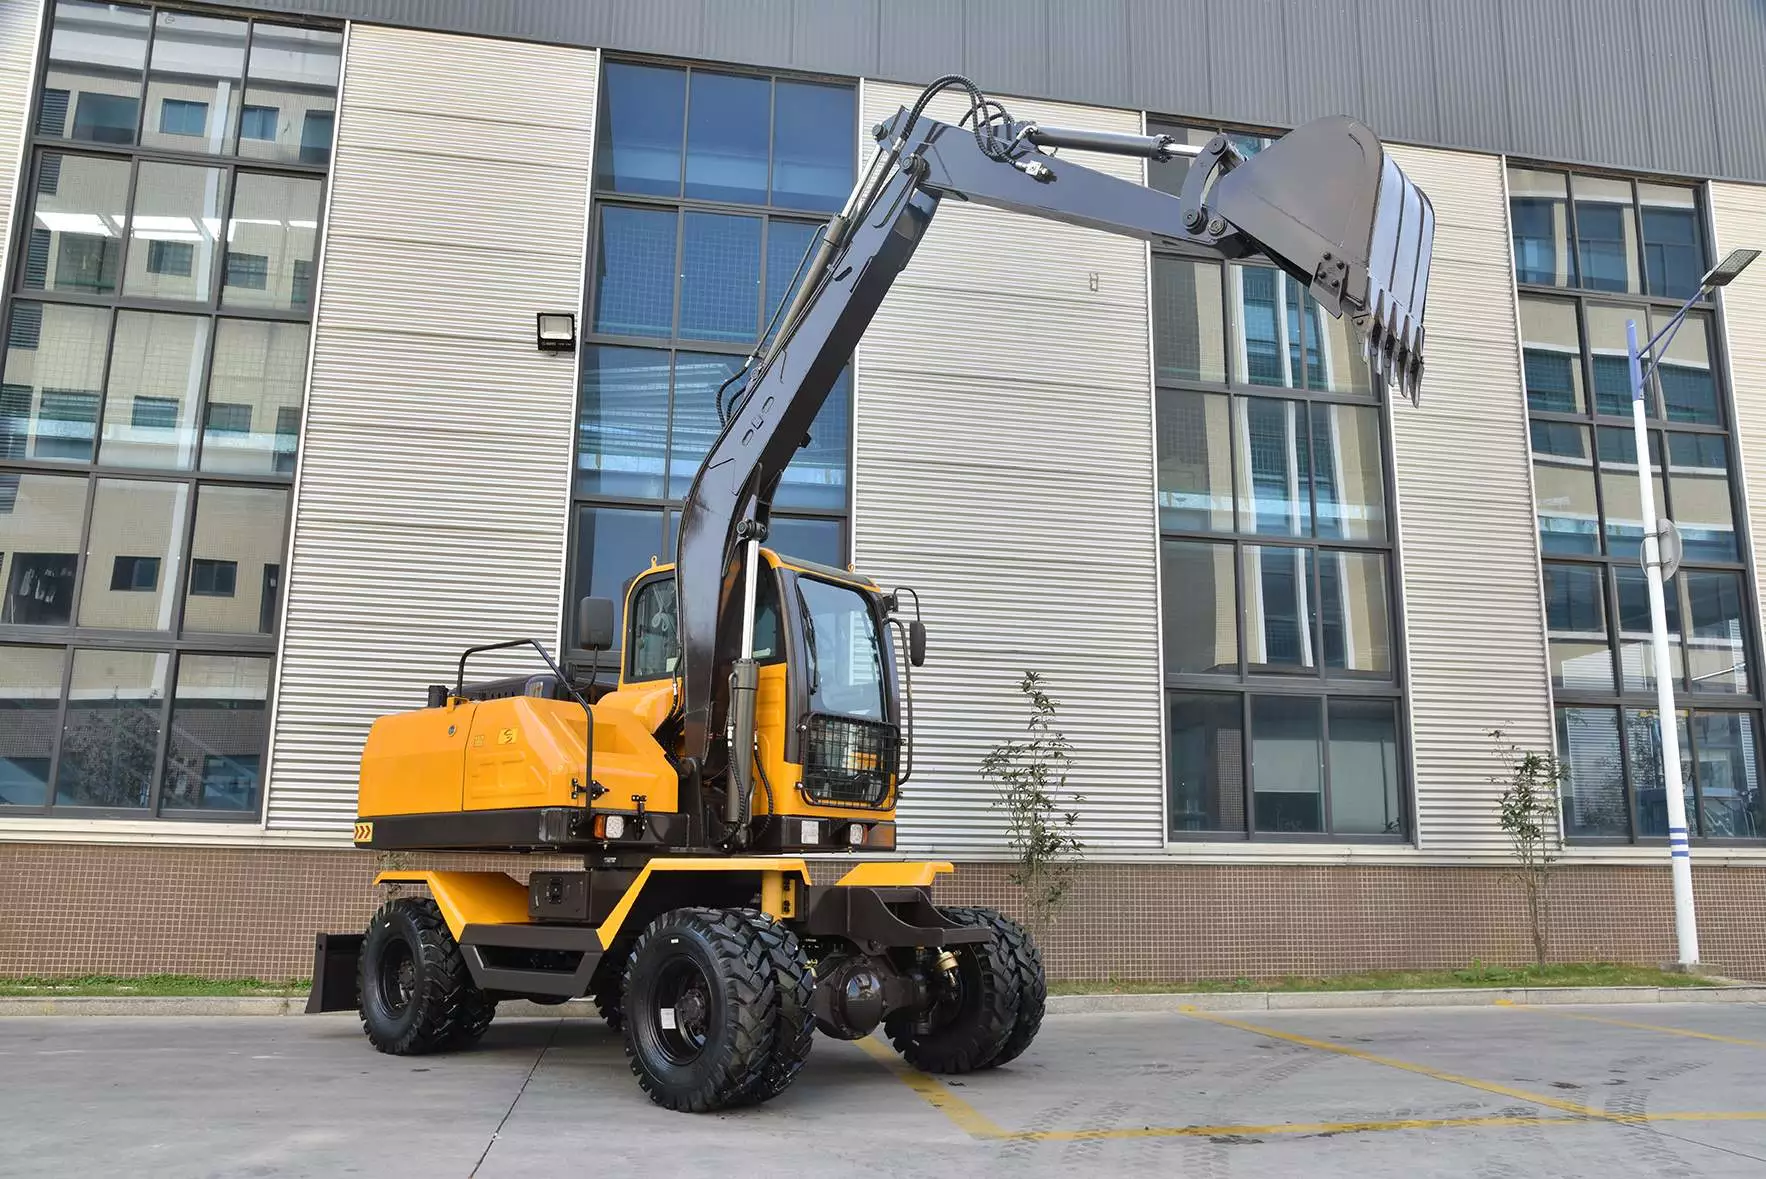 New Model Wheeled Excavator for Sale, with Double Gear Box